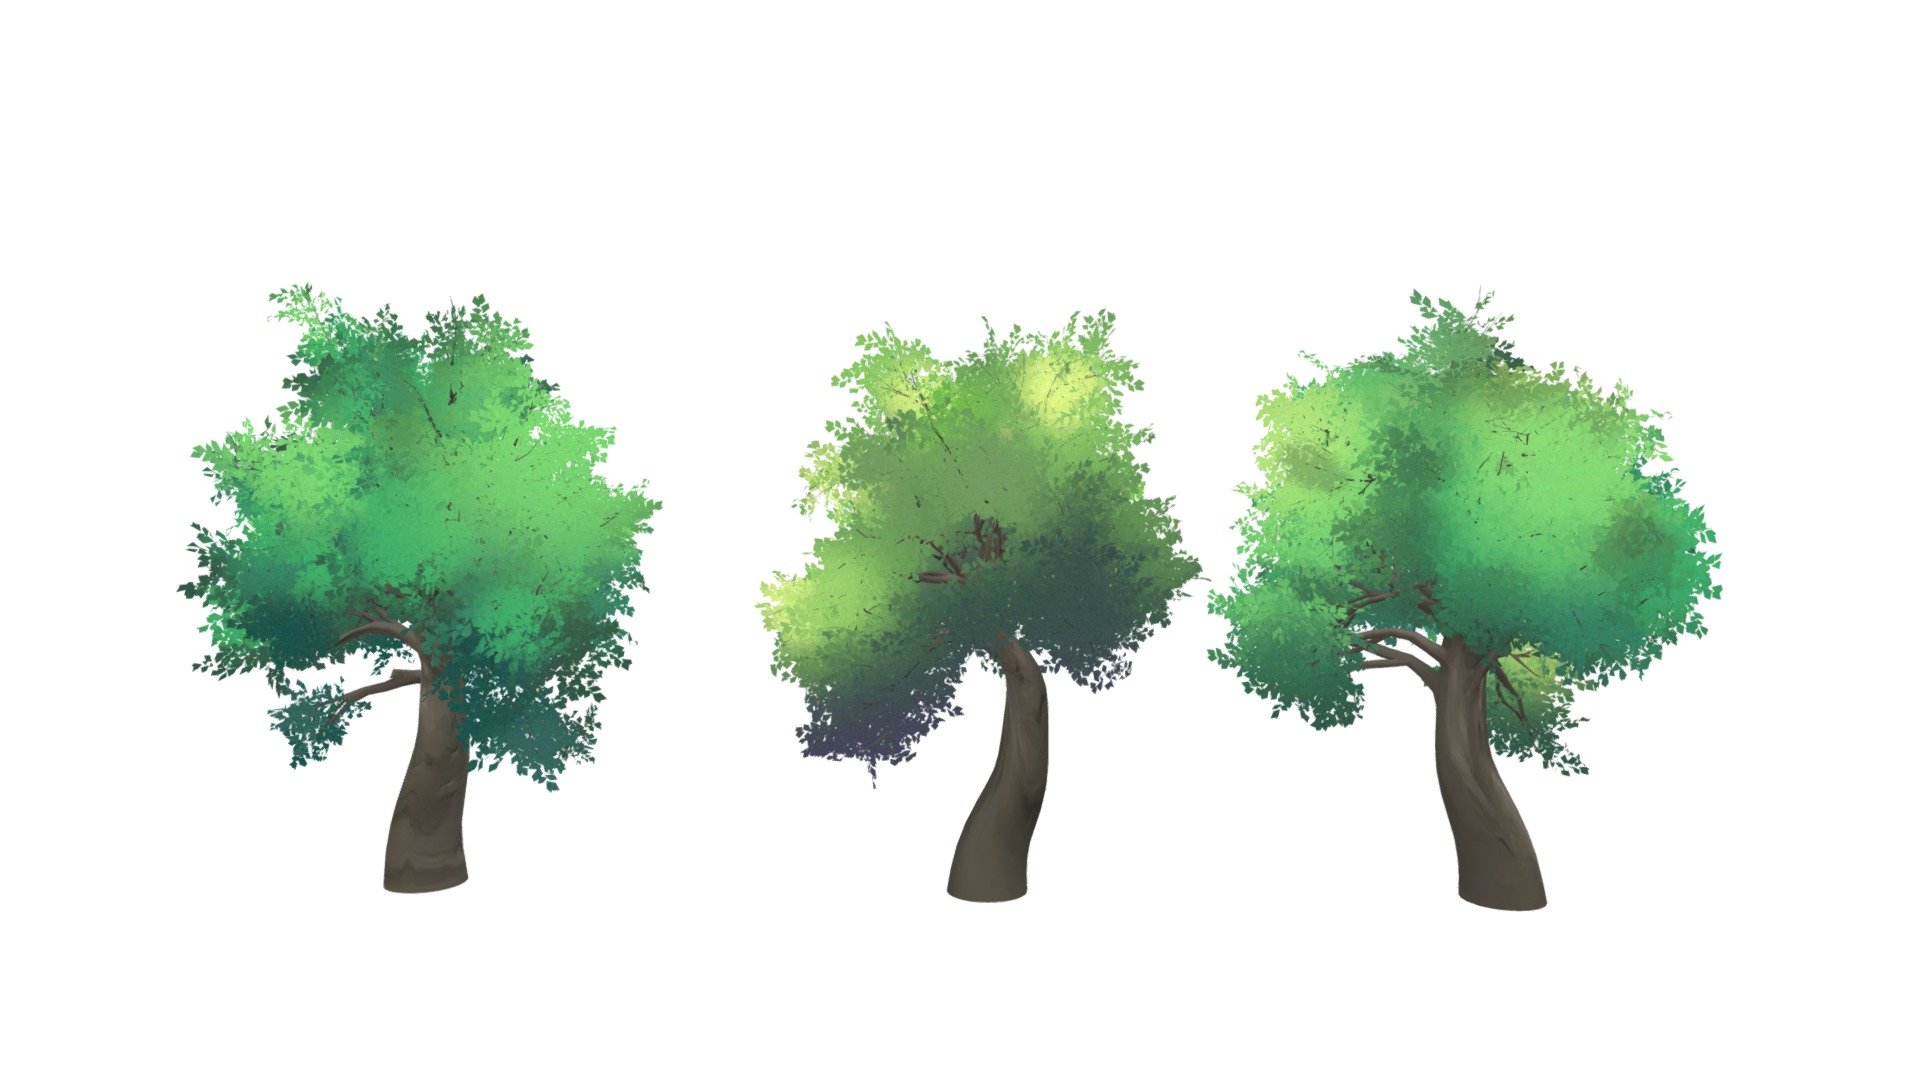 New Anime set of Trees

These are higherpoly count than the previous ones 

But they look much better 

You can add the leaves to any trunk of your choice and you can have as many new anime trees as you need

You can also sculpt the leaves to give the shape that you want

Tree1 on the right: 156.000 Faces

Tree2 on the middle: 226.000 Faces

Tree 3 on the left: 177.000 Faces

glb/gltf, fbx and textures included on the zip file - Anime Trees Highpoly - Buy Royalty Free 3D model by ahingel 3d model